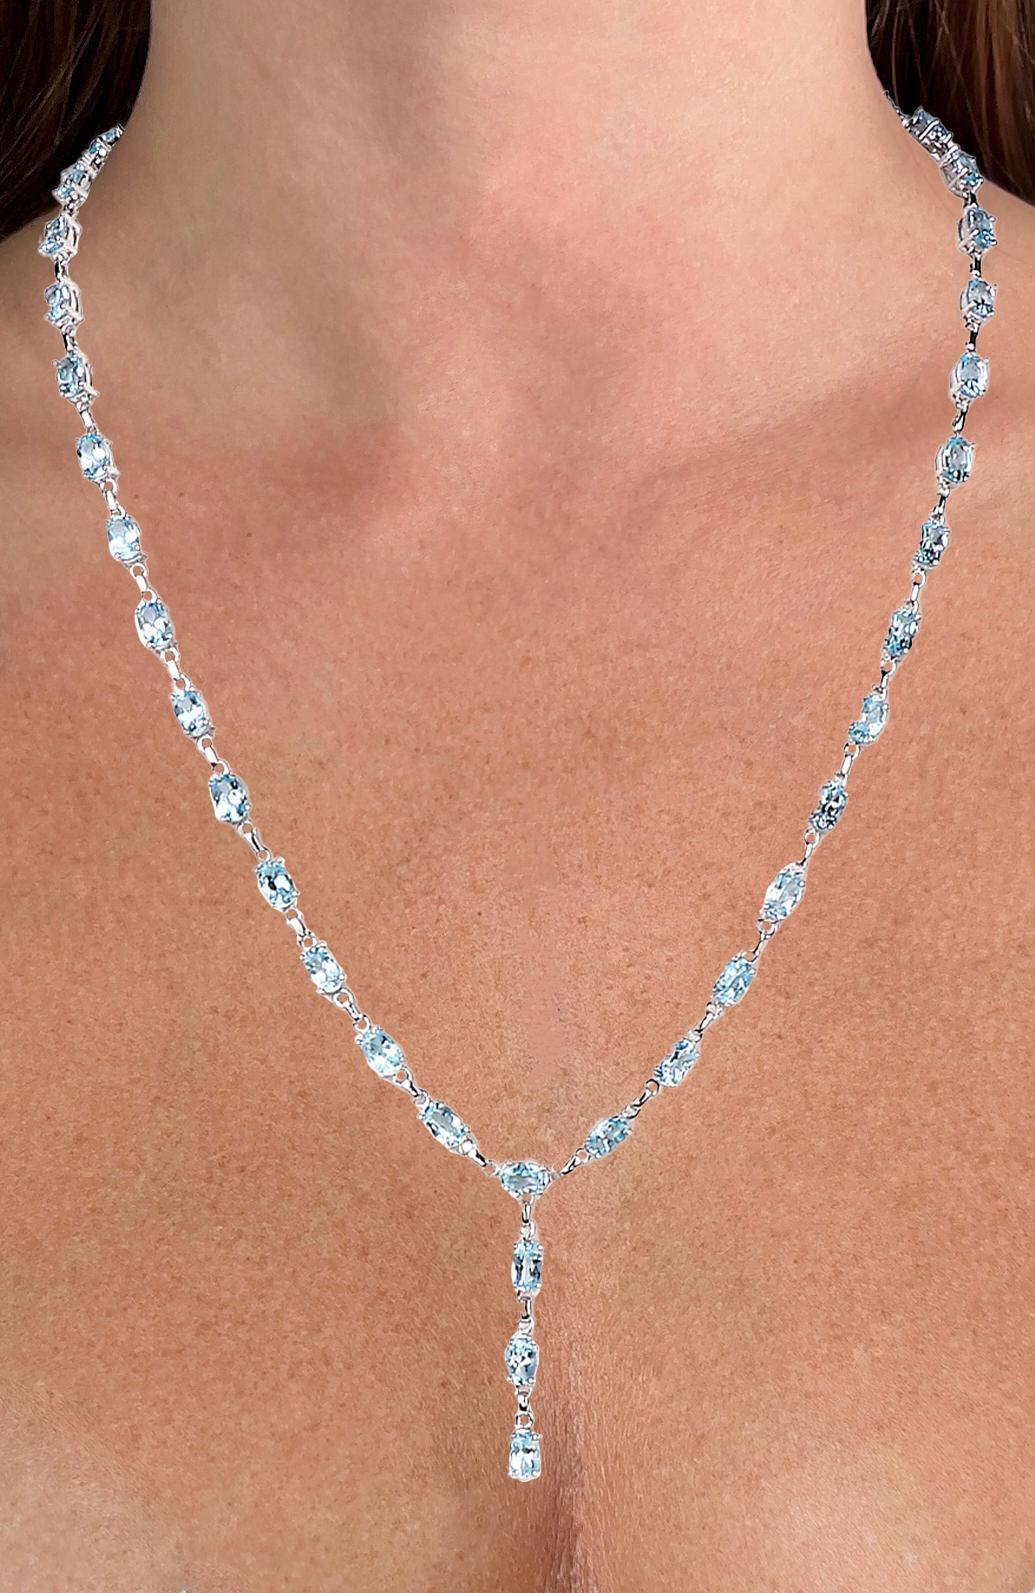 Contemporary Blue Topaz Drop Necklace 23 Carats Sterling Silver For Sale